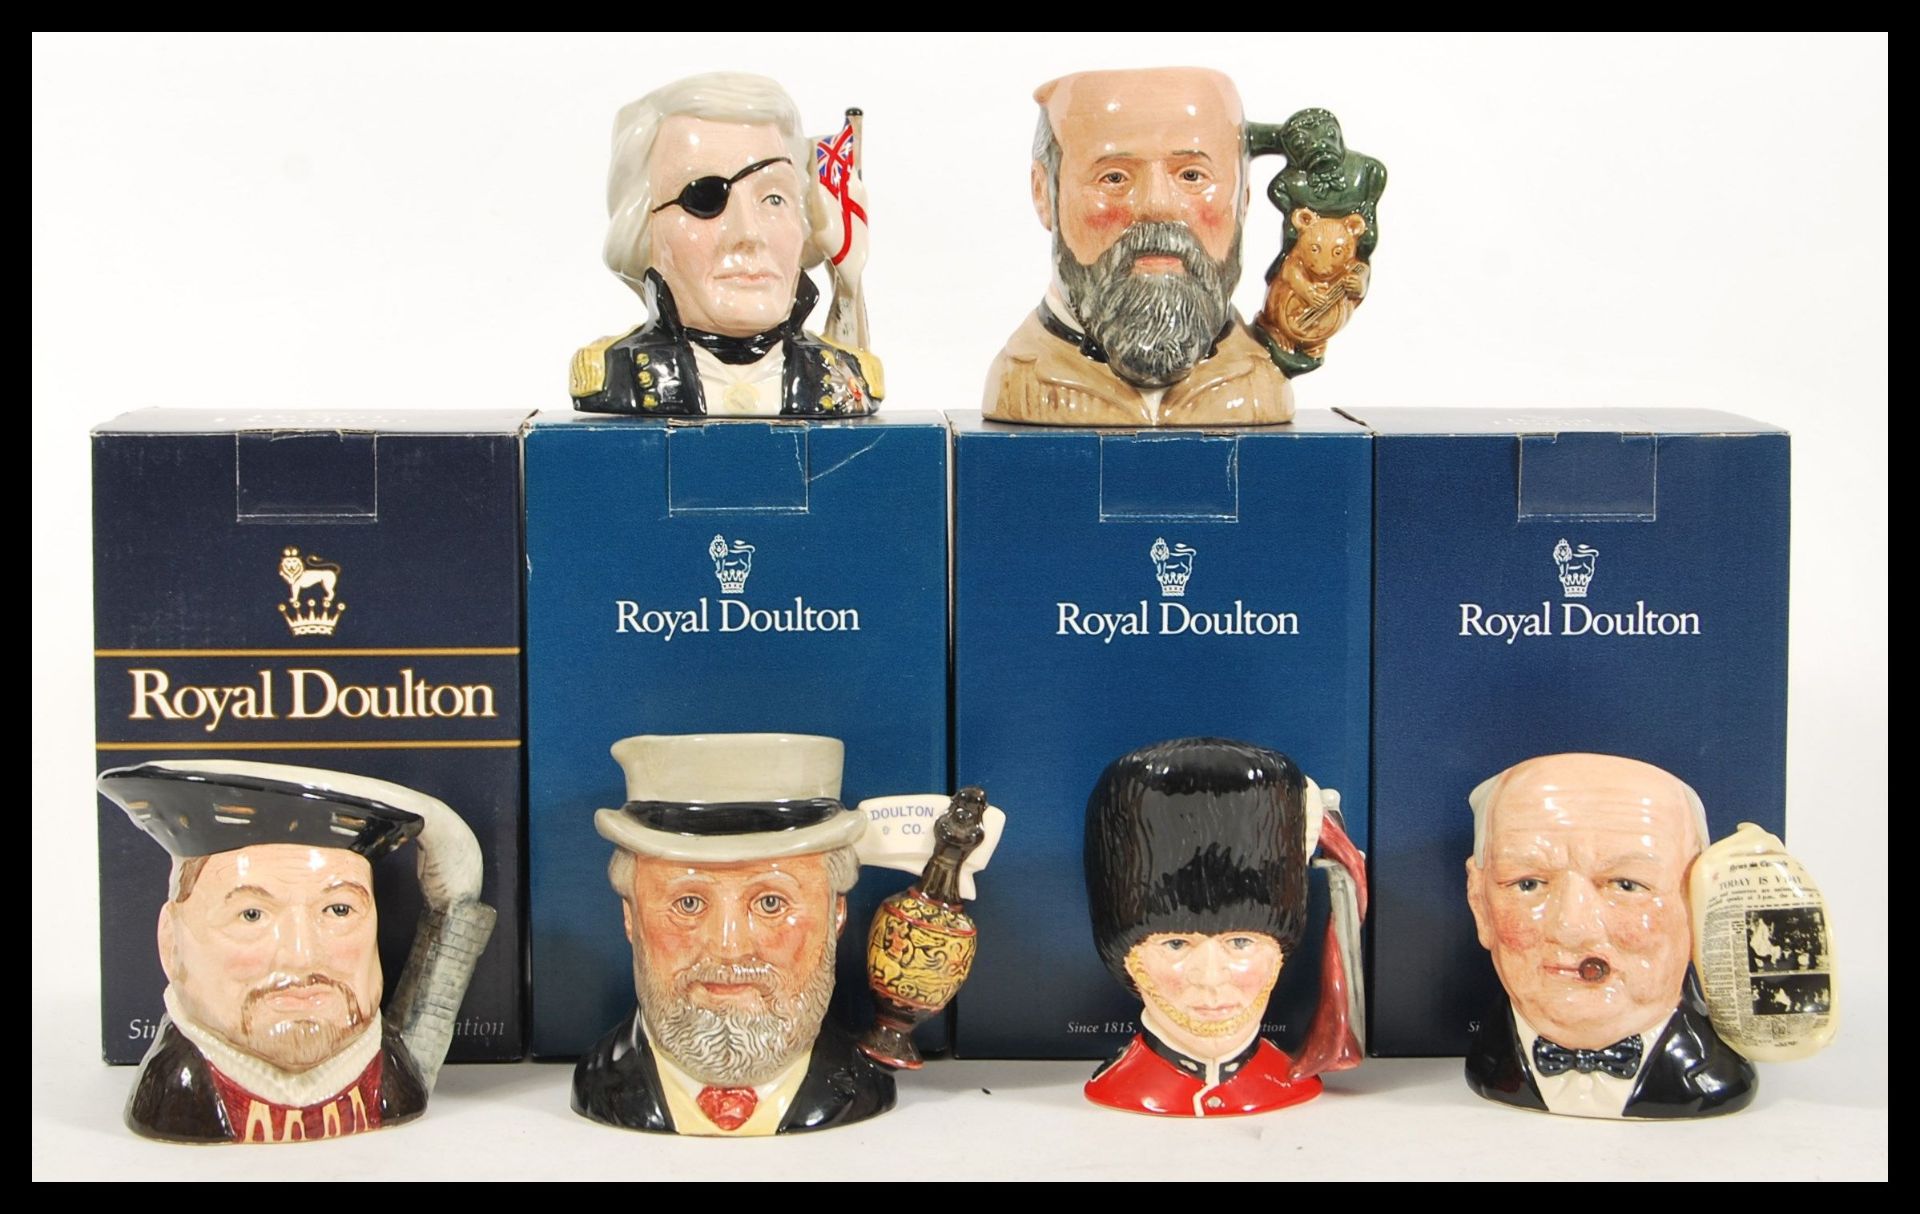 A collection of Royal Doulton character jugs in the form of historical figures to include Henry VIII